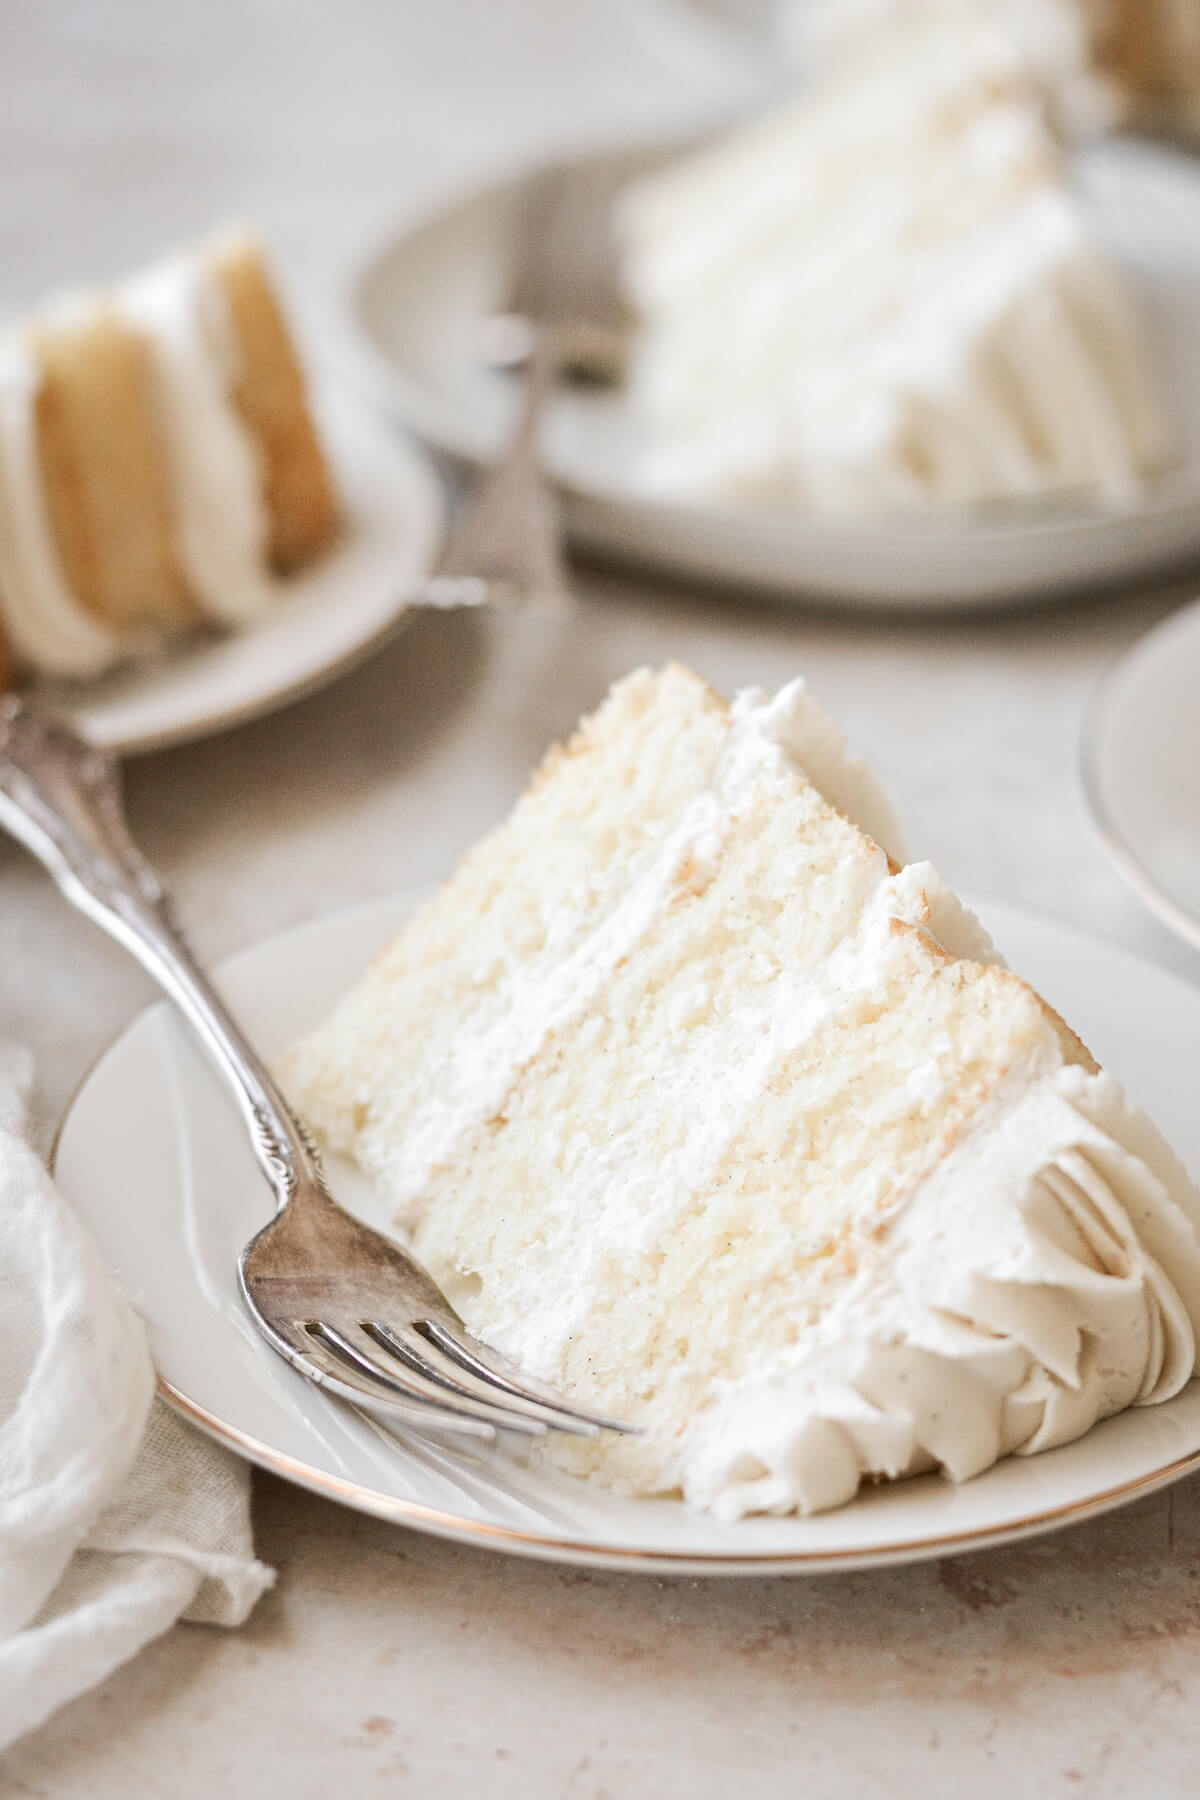 Slice of vanilla cake with a silver fork.